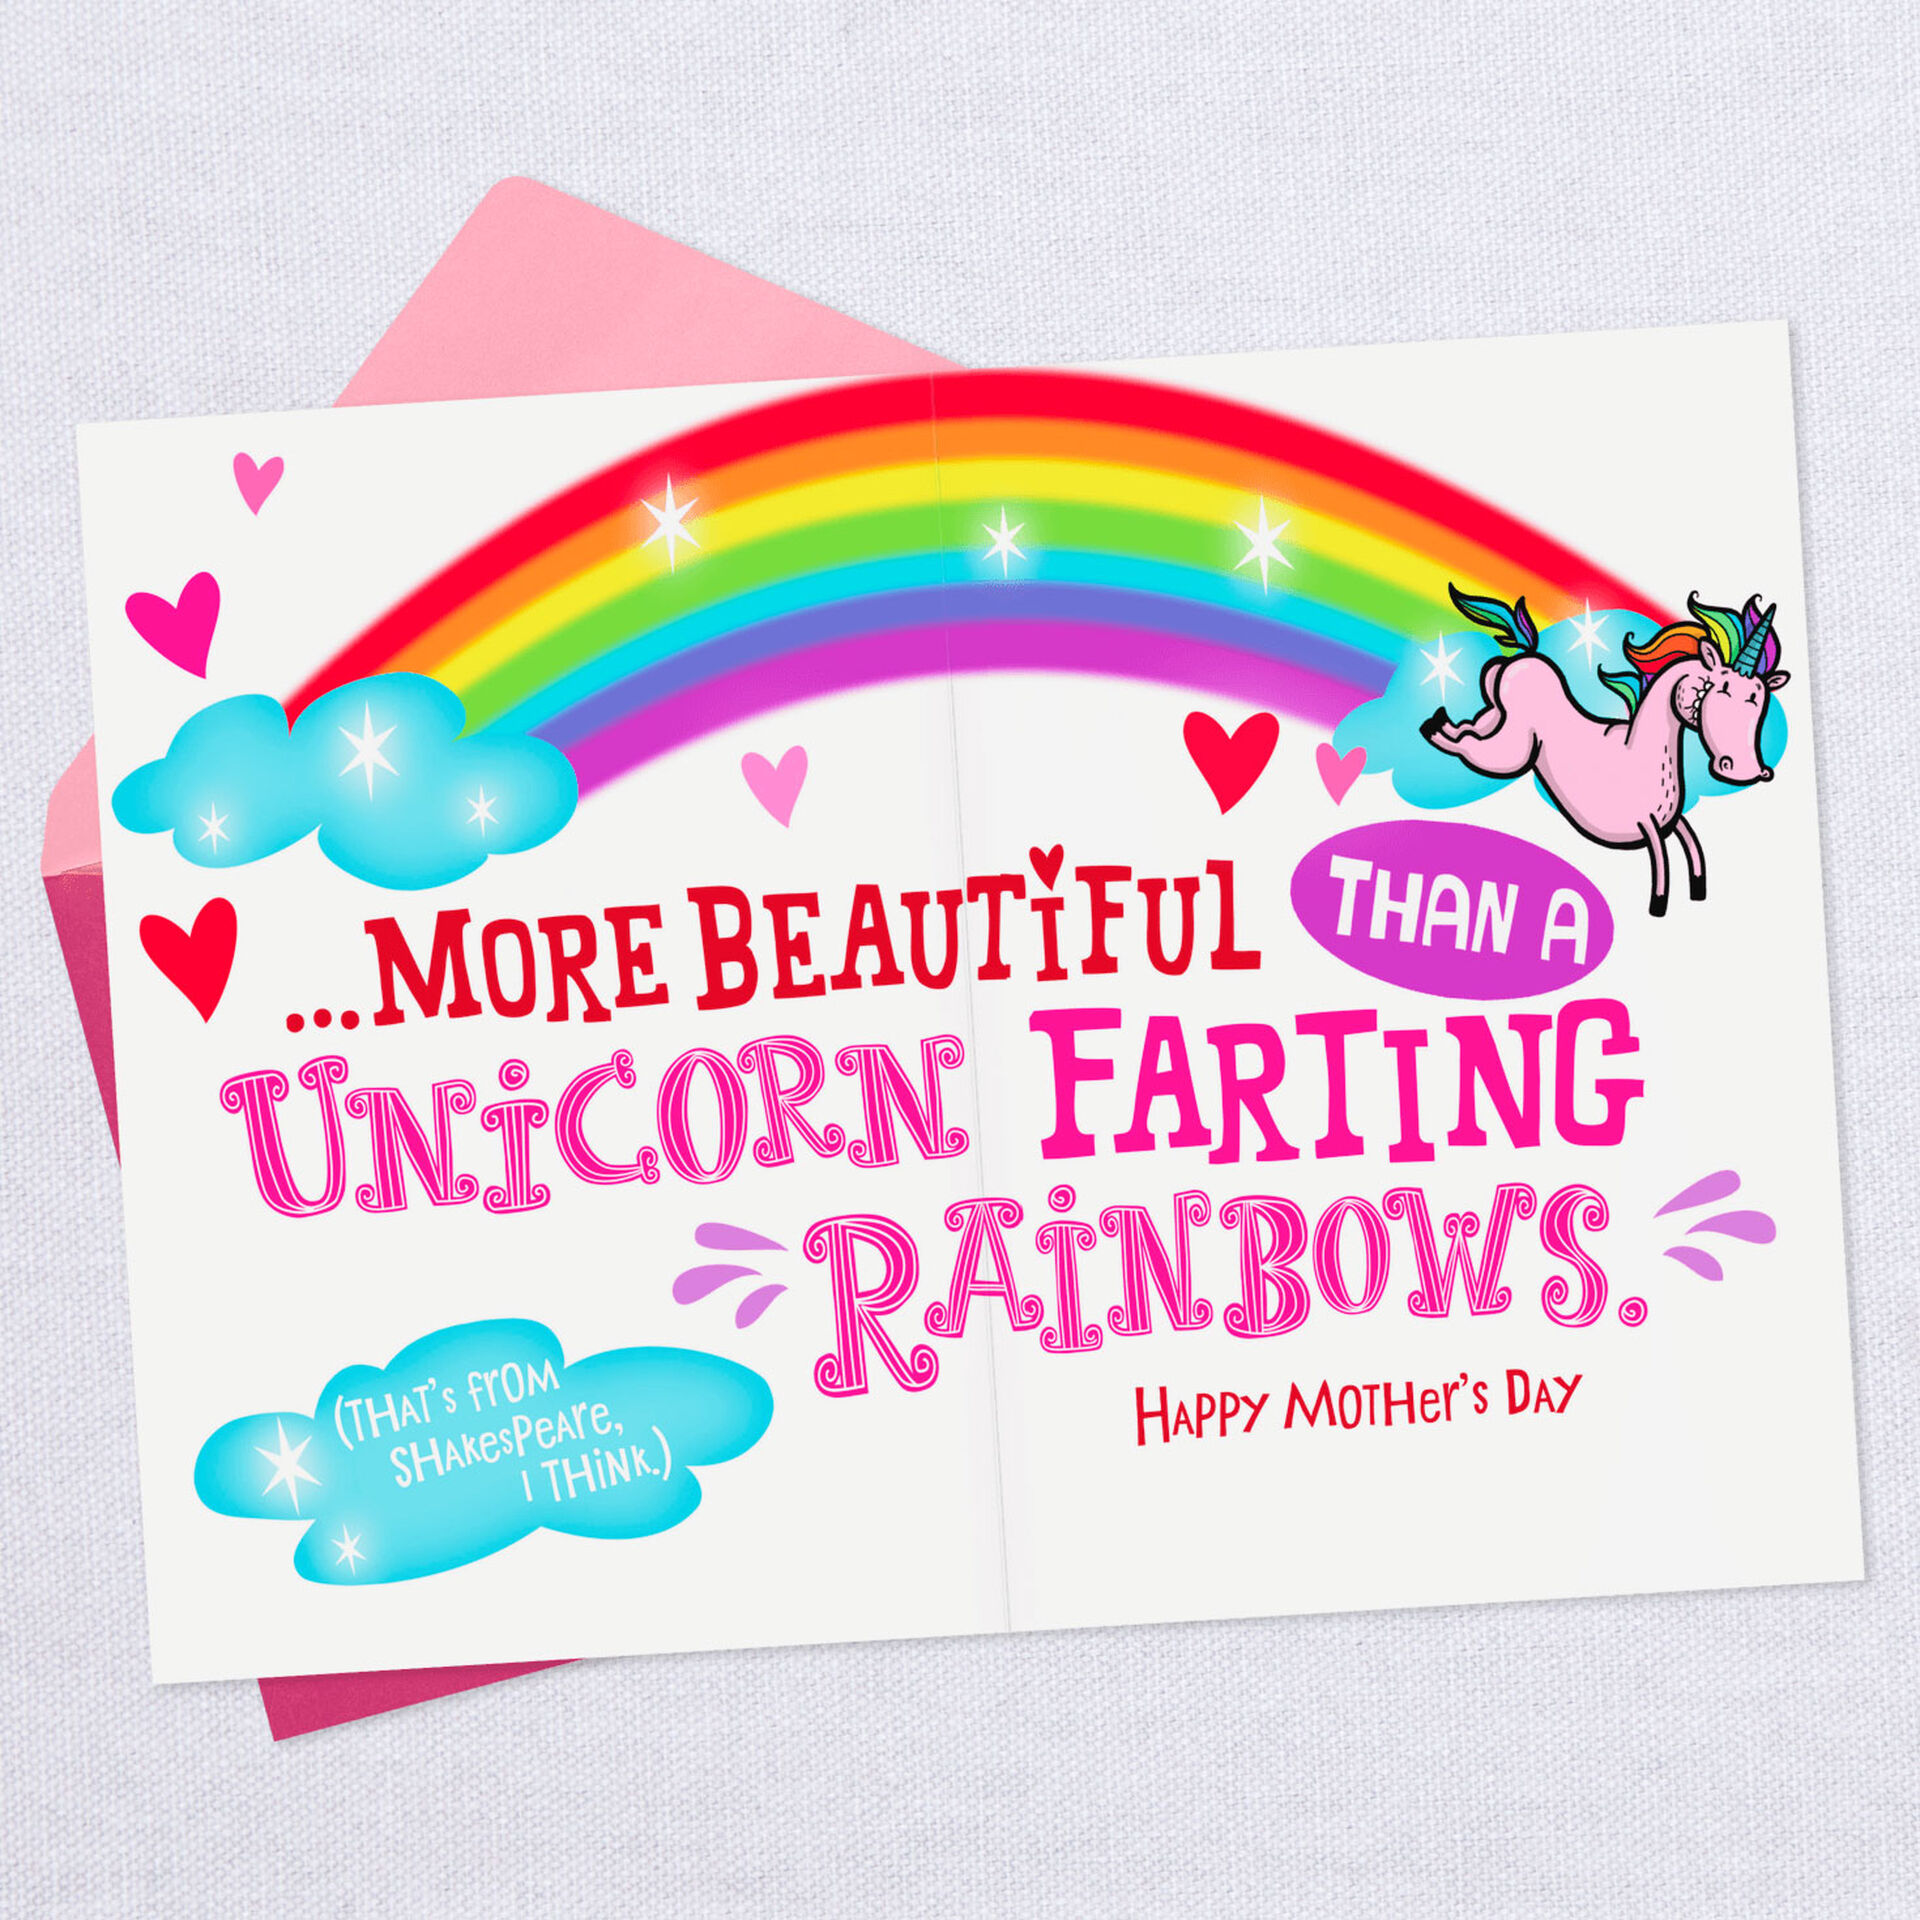 Unicorn Farts Funny Mother S Day Sound Card Greeting Cards Hallmark